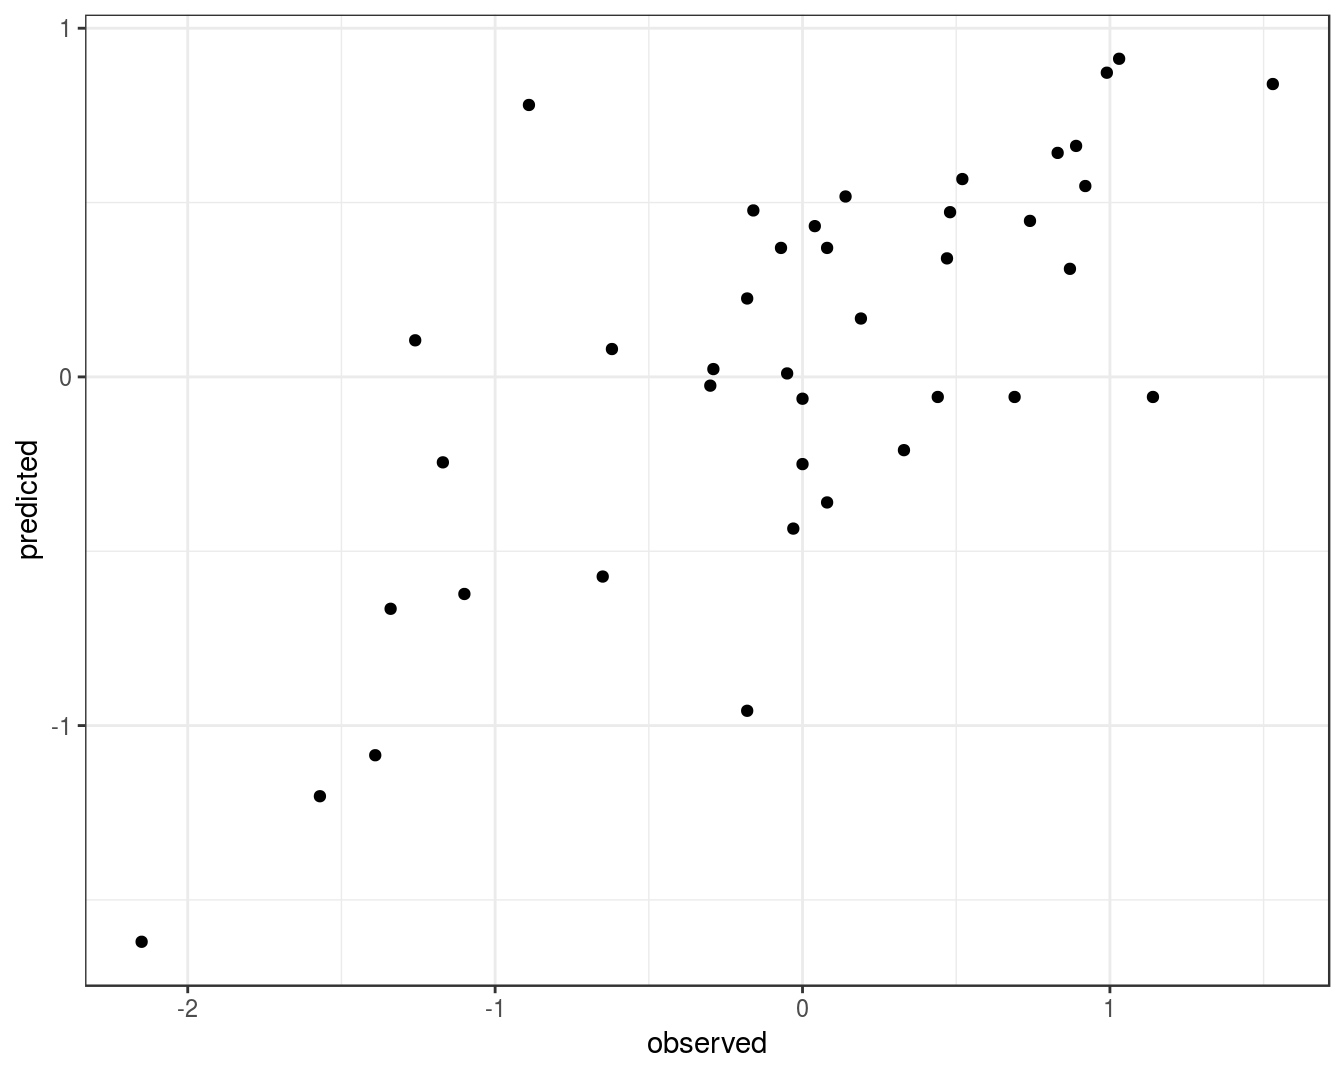 Concordance between observed concentration ratios and those predicted by _k_-nn regression.